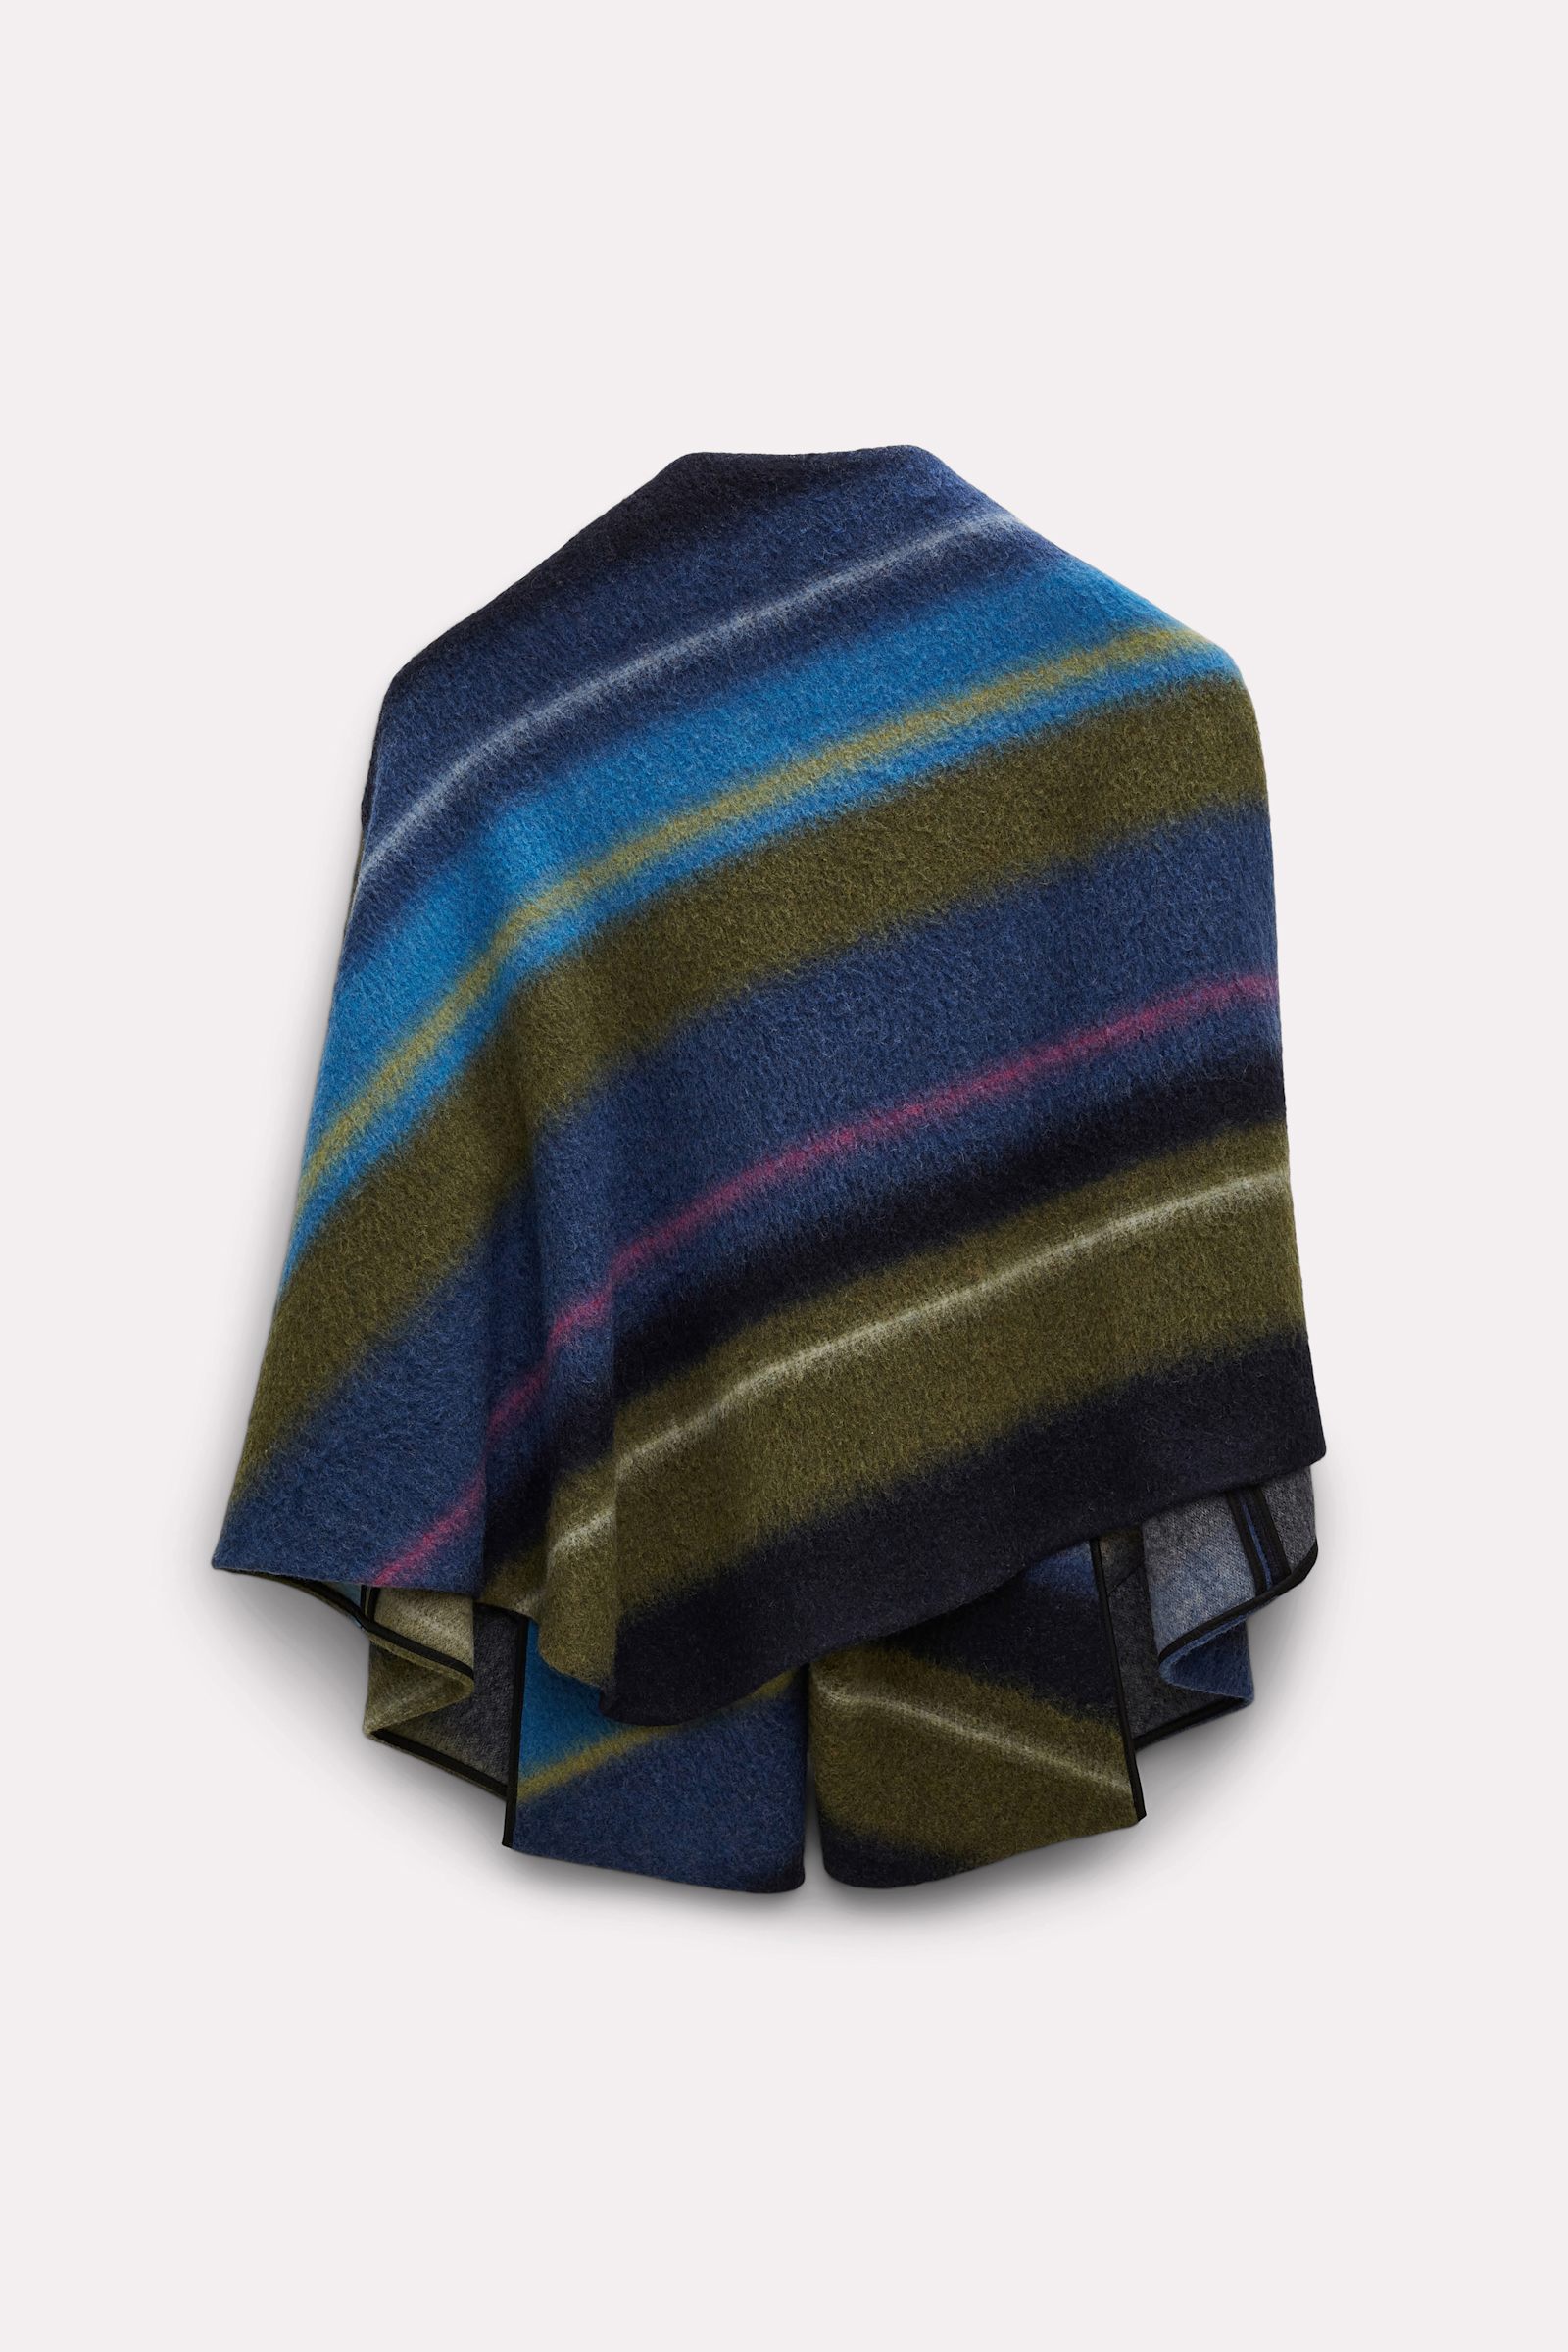 Dorothee Schumacher Cape-style jacket in a striped wool blend colorful stripes